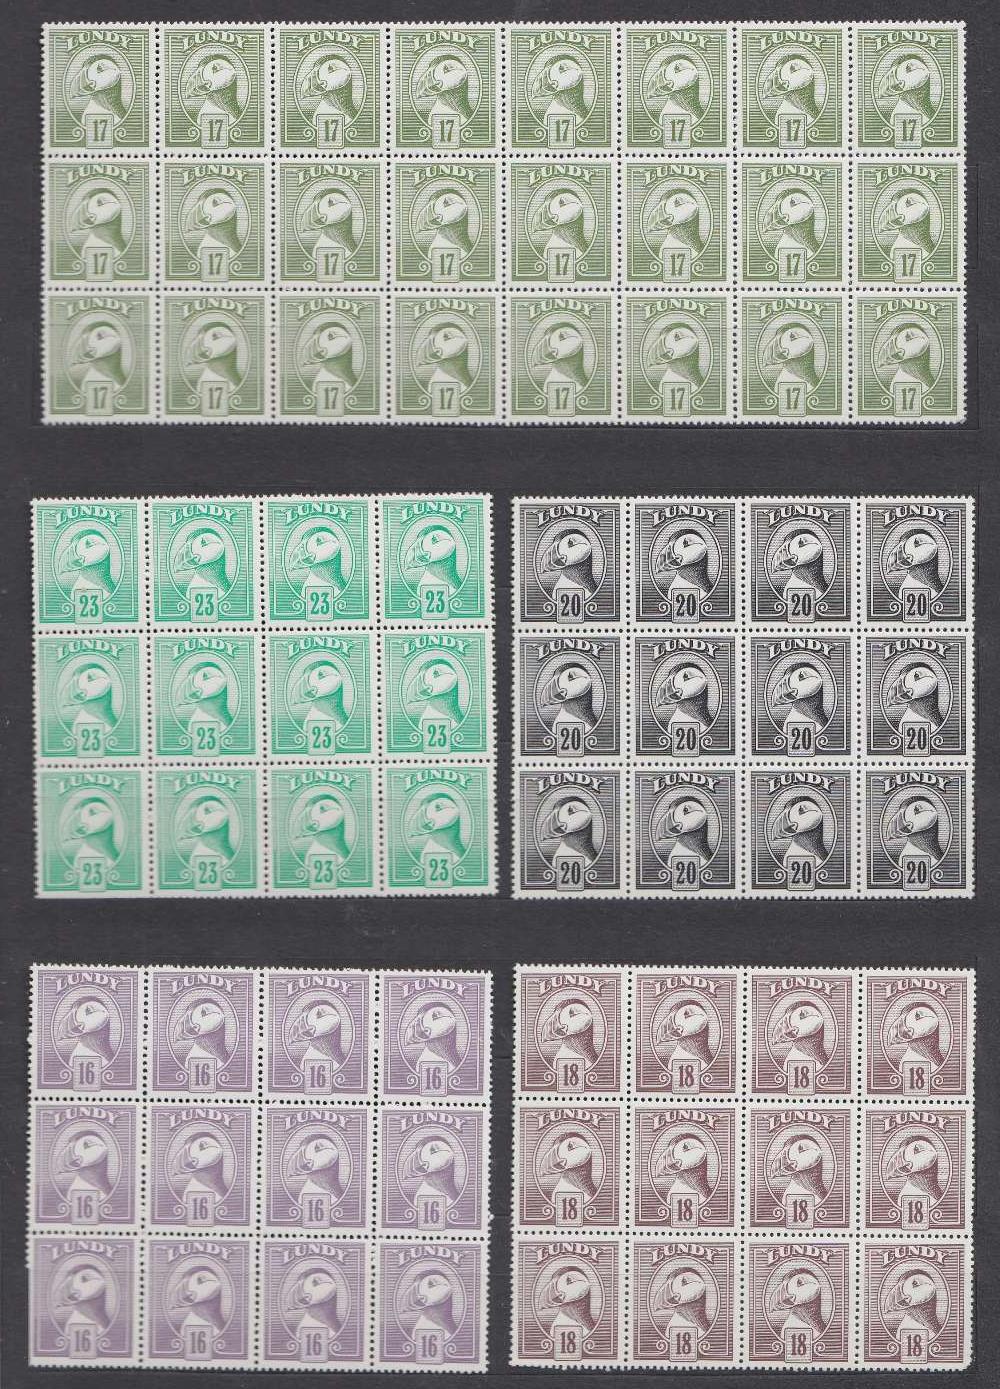 STAMPS LOCALS, stockbook with U/M GB local issues from Staffa, Lundy, Bardsey, Bernera Islands, - Image 2 of 2